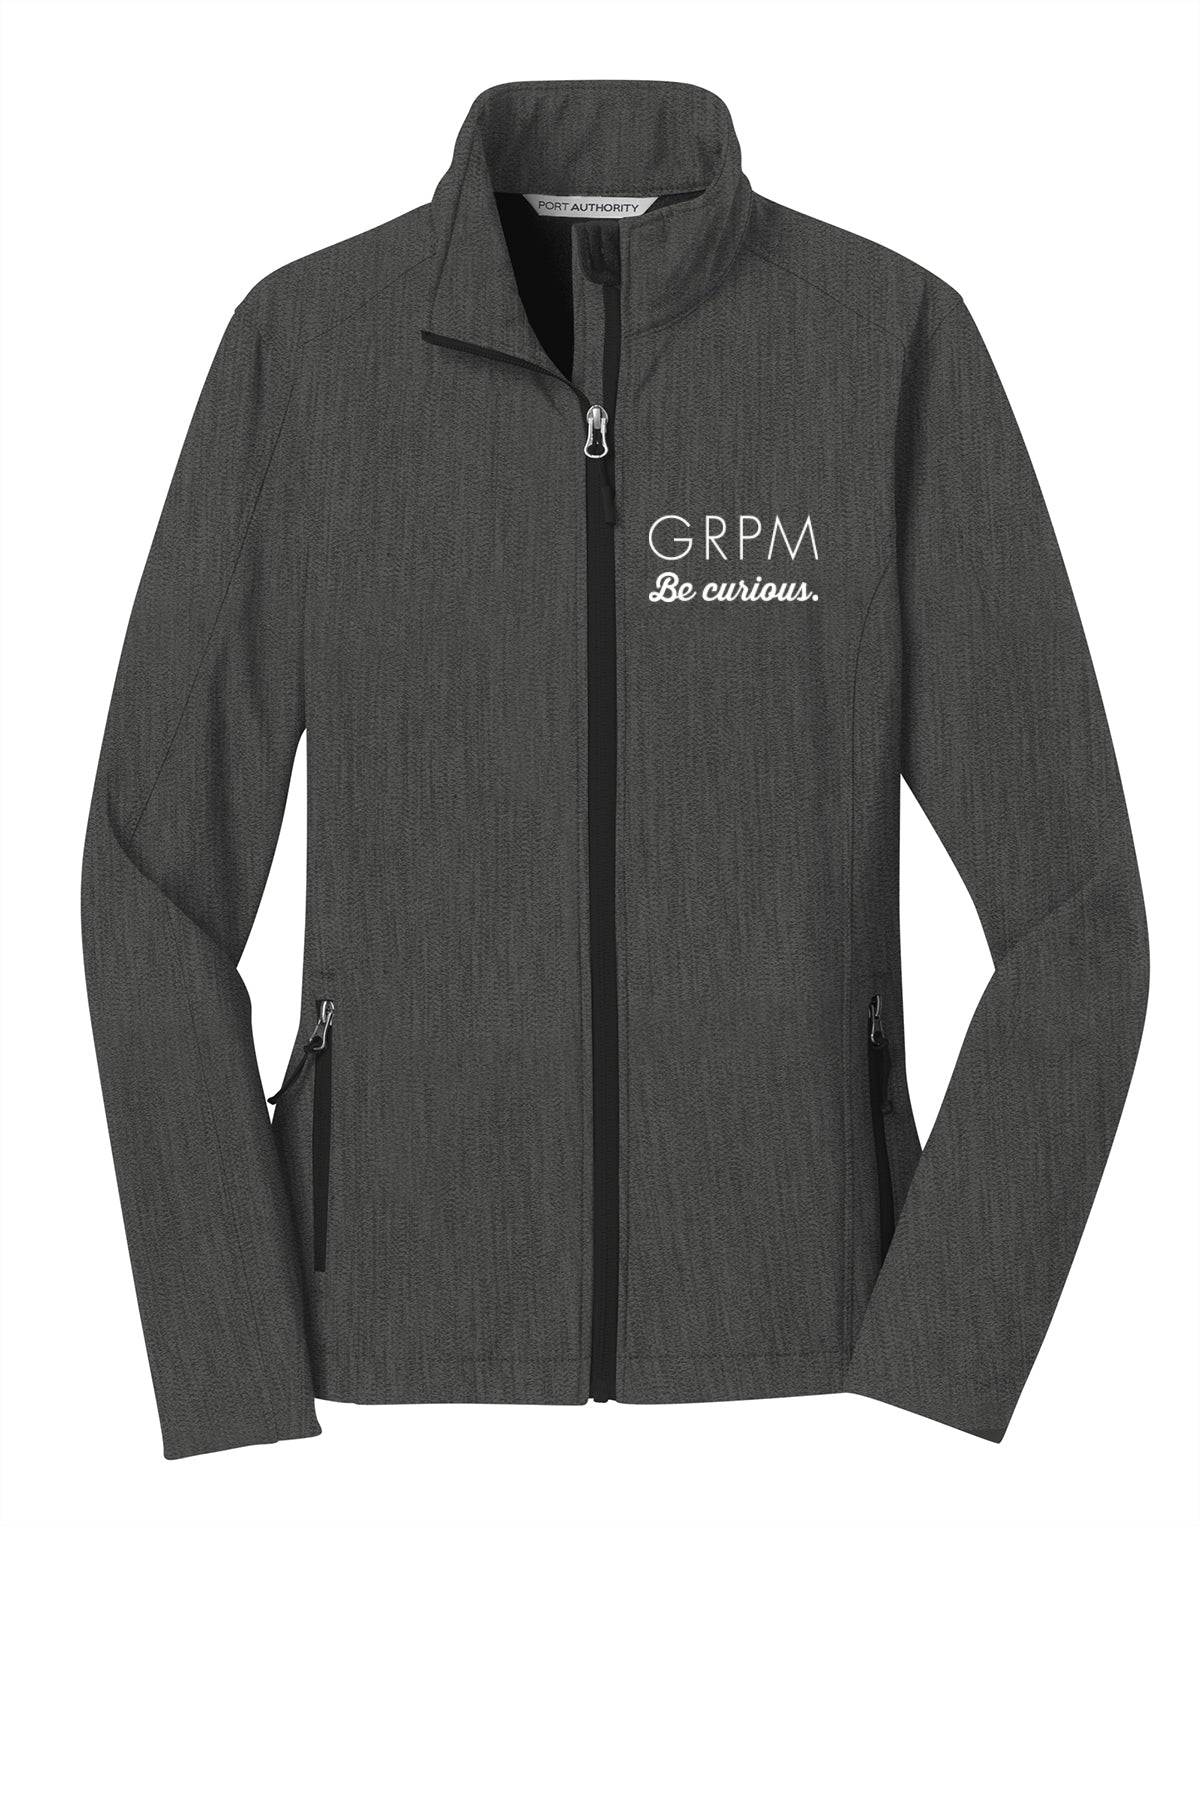 GRPM BE CURIOUS JACKET